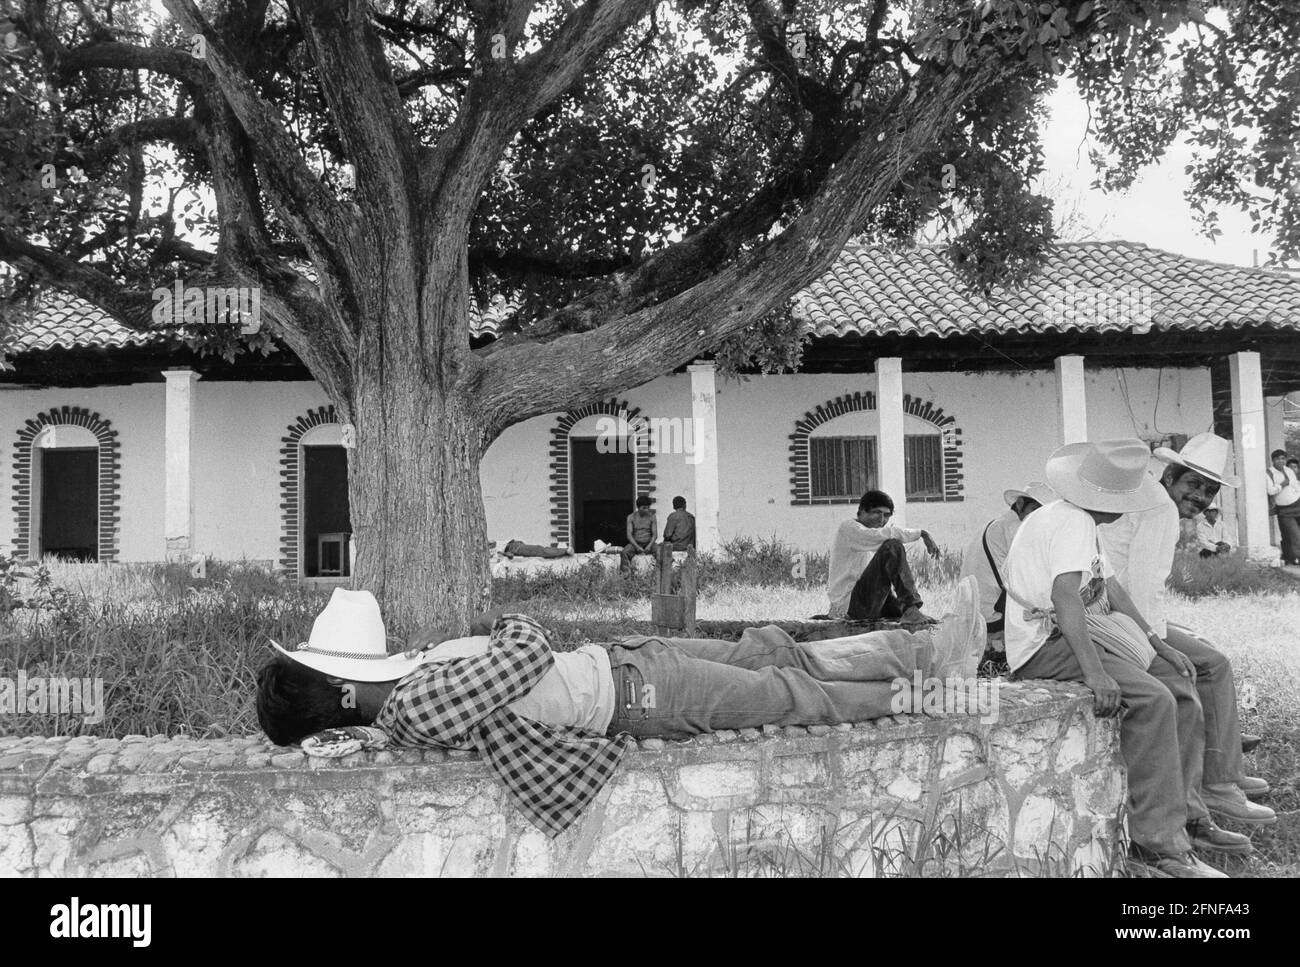 During a land occupation in the highlands of Chiapas. Campesino families (desplazados) evicted from the land occupy a finca and are taking a siesta. [automated translation] Stock Photo